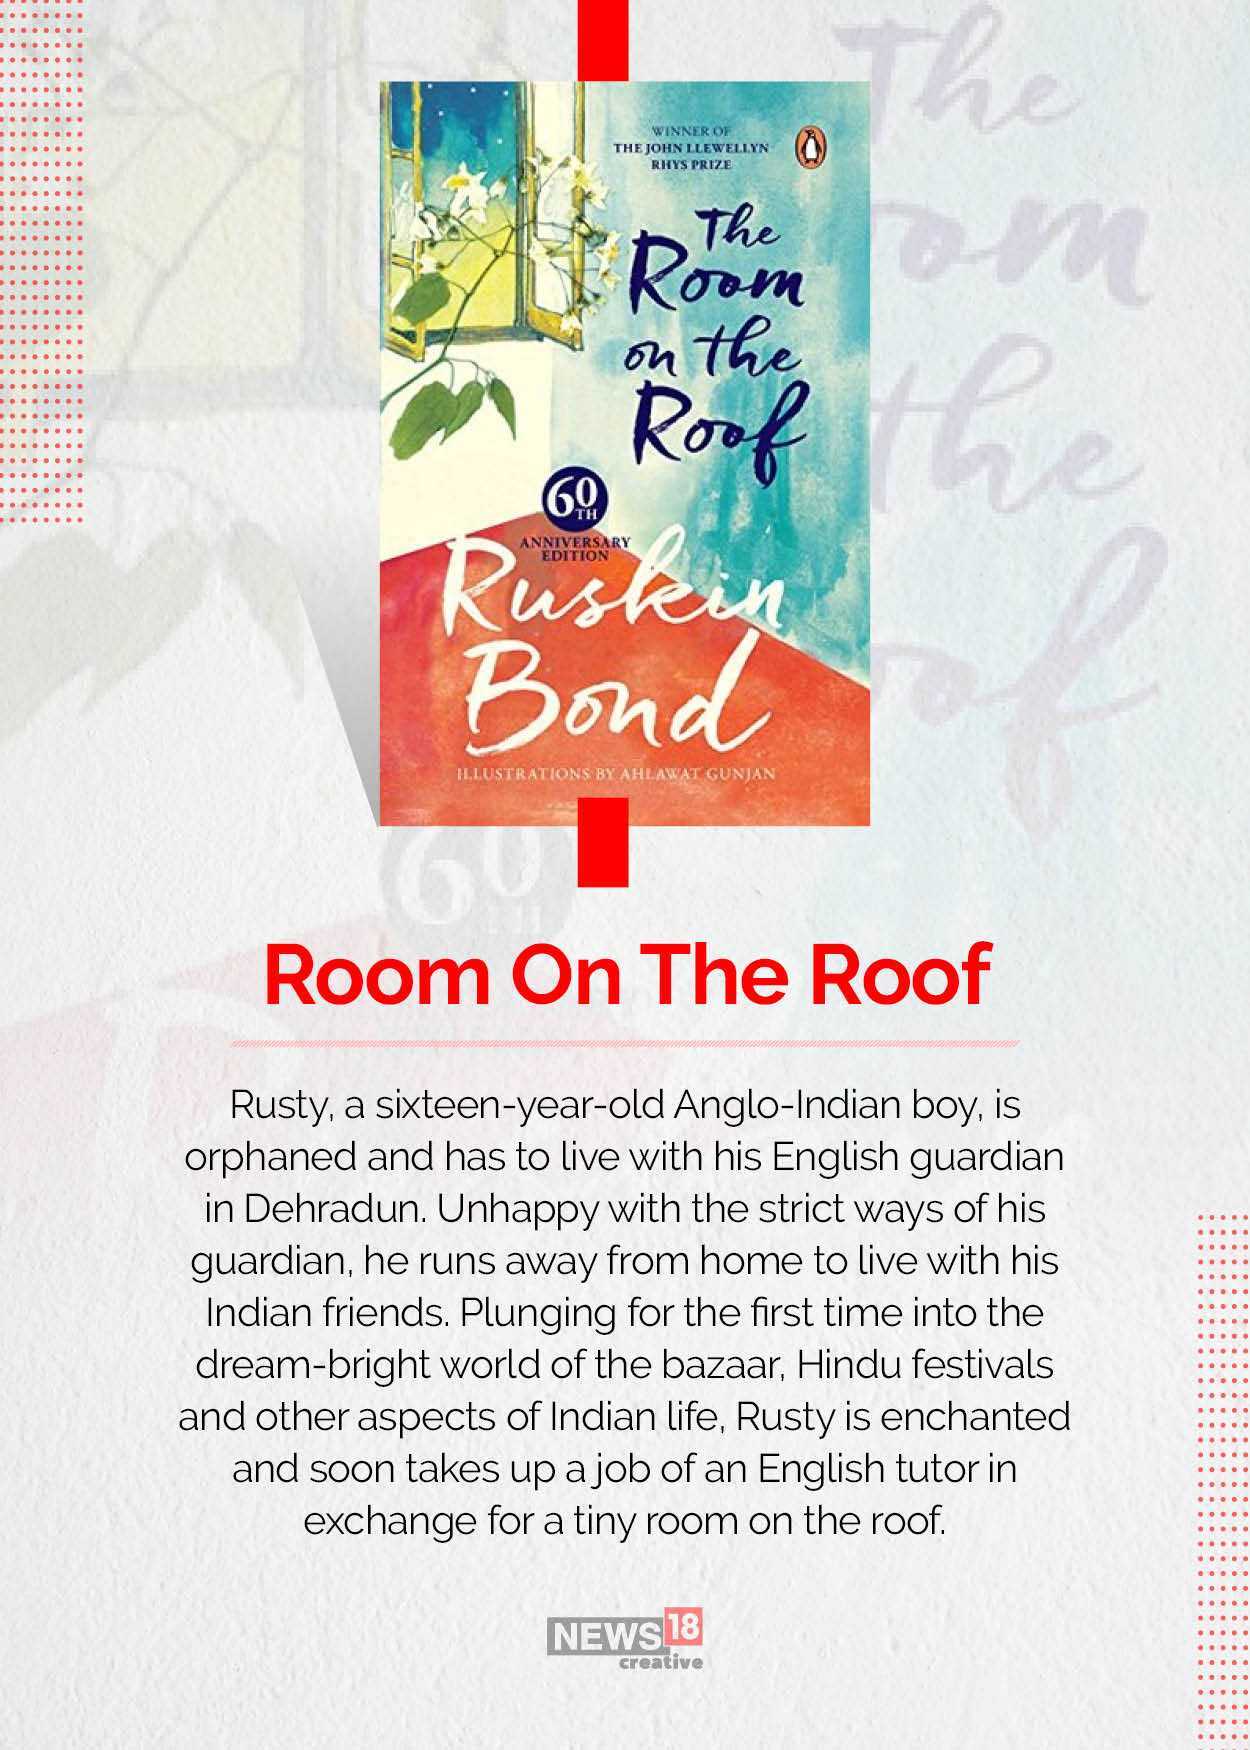 Why these four books by Ruskin Bond should be on your reading list